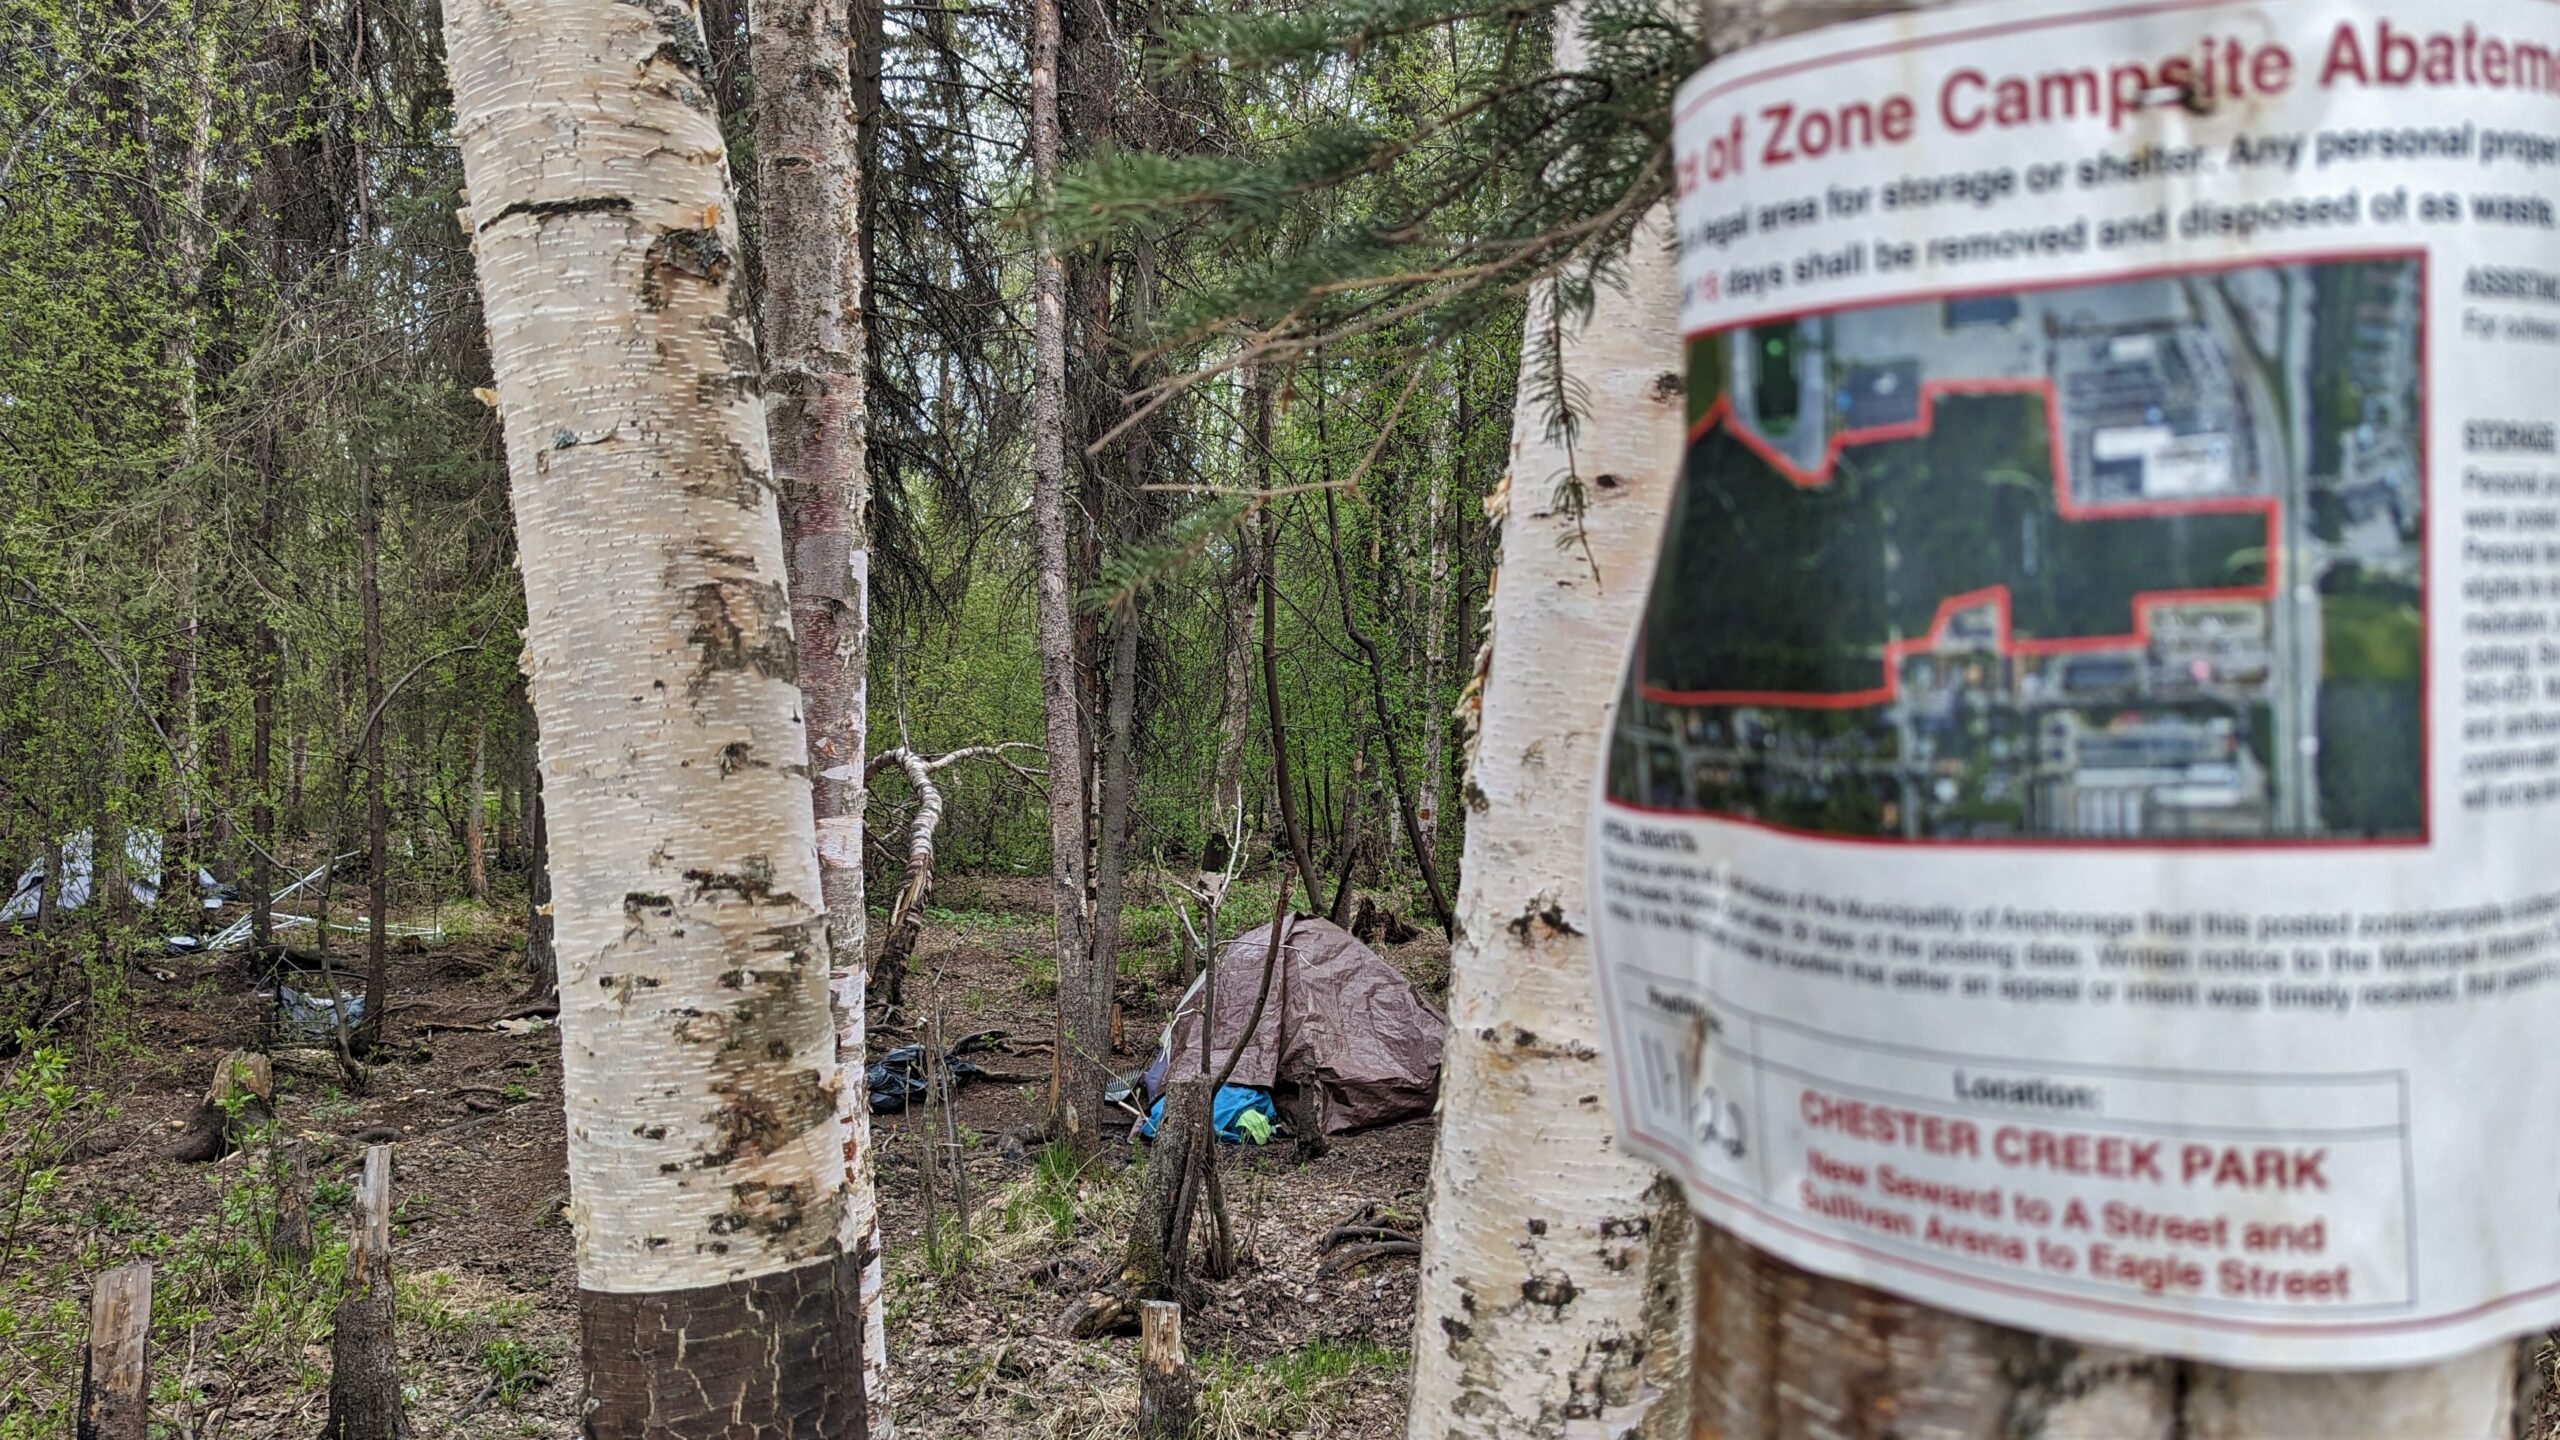 An abatement notice near a tent in the woods